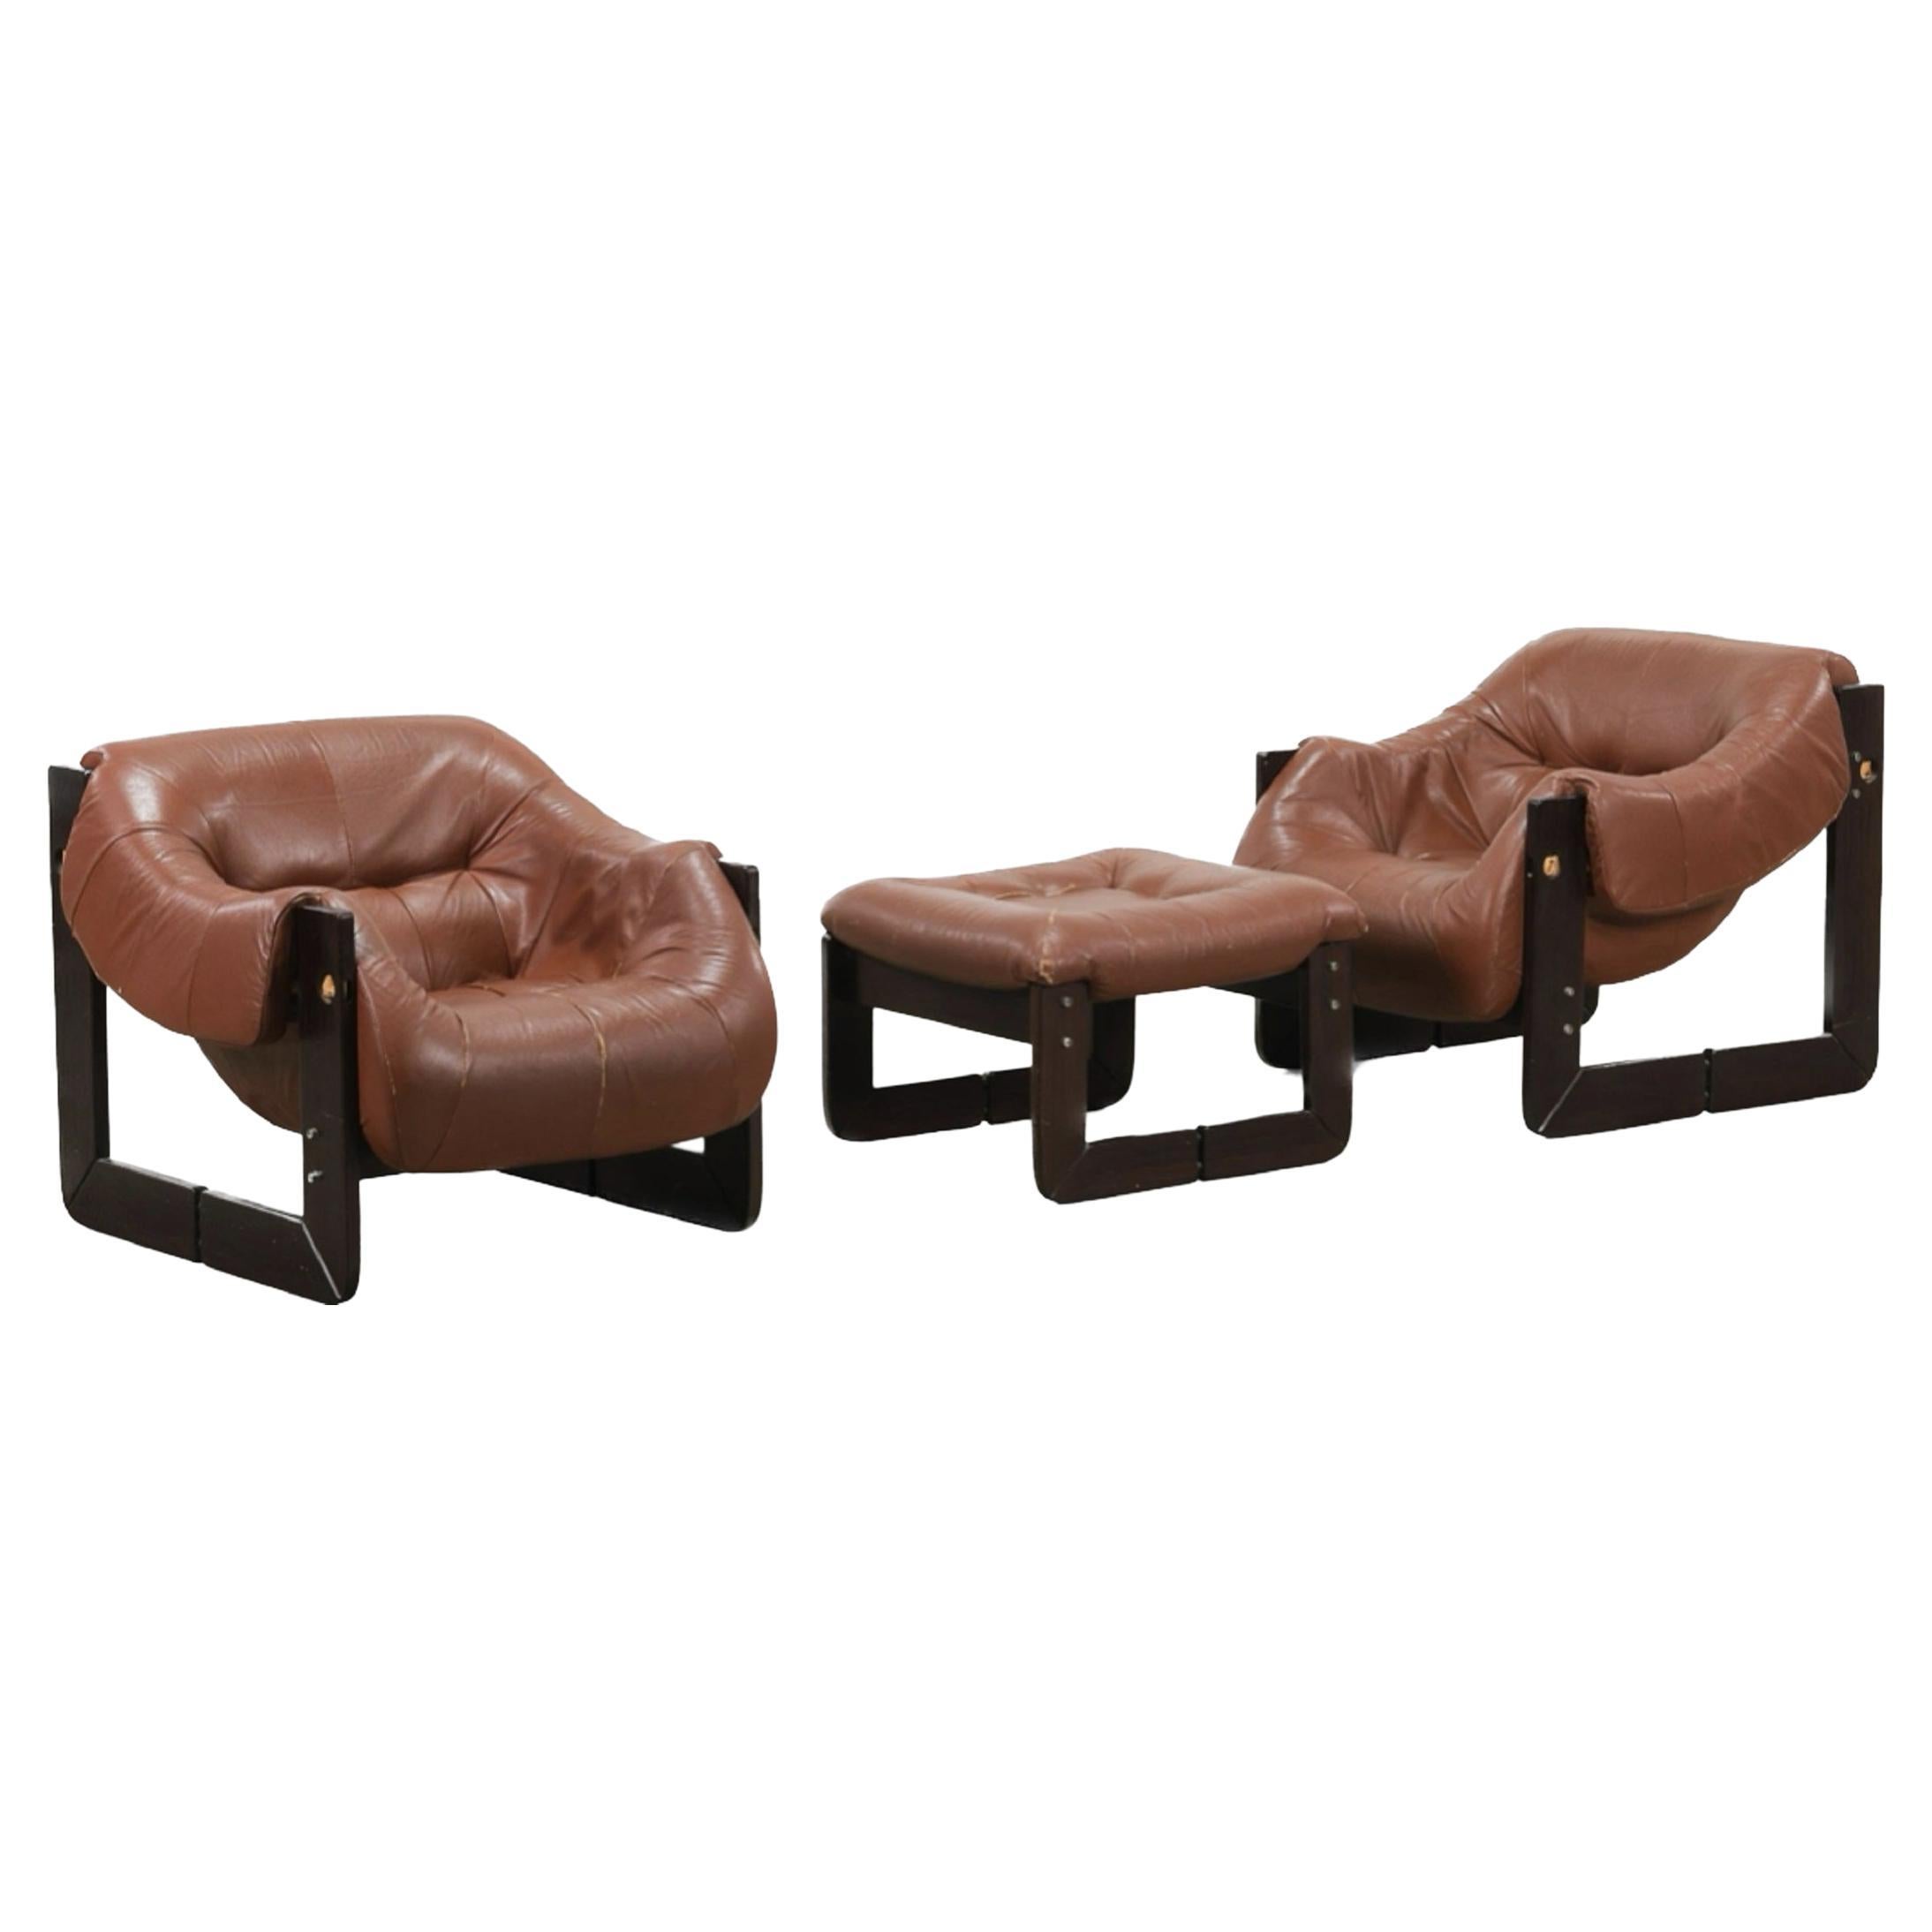 Percival Lafer, MP-97 Lounge Chairs, Brazilian Rosewood, Brown Leather, 1970s